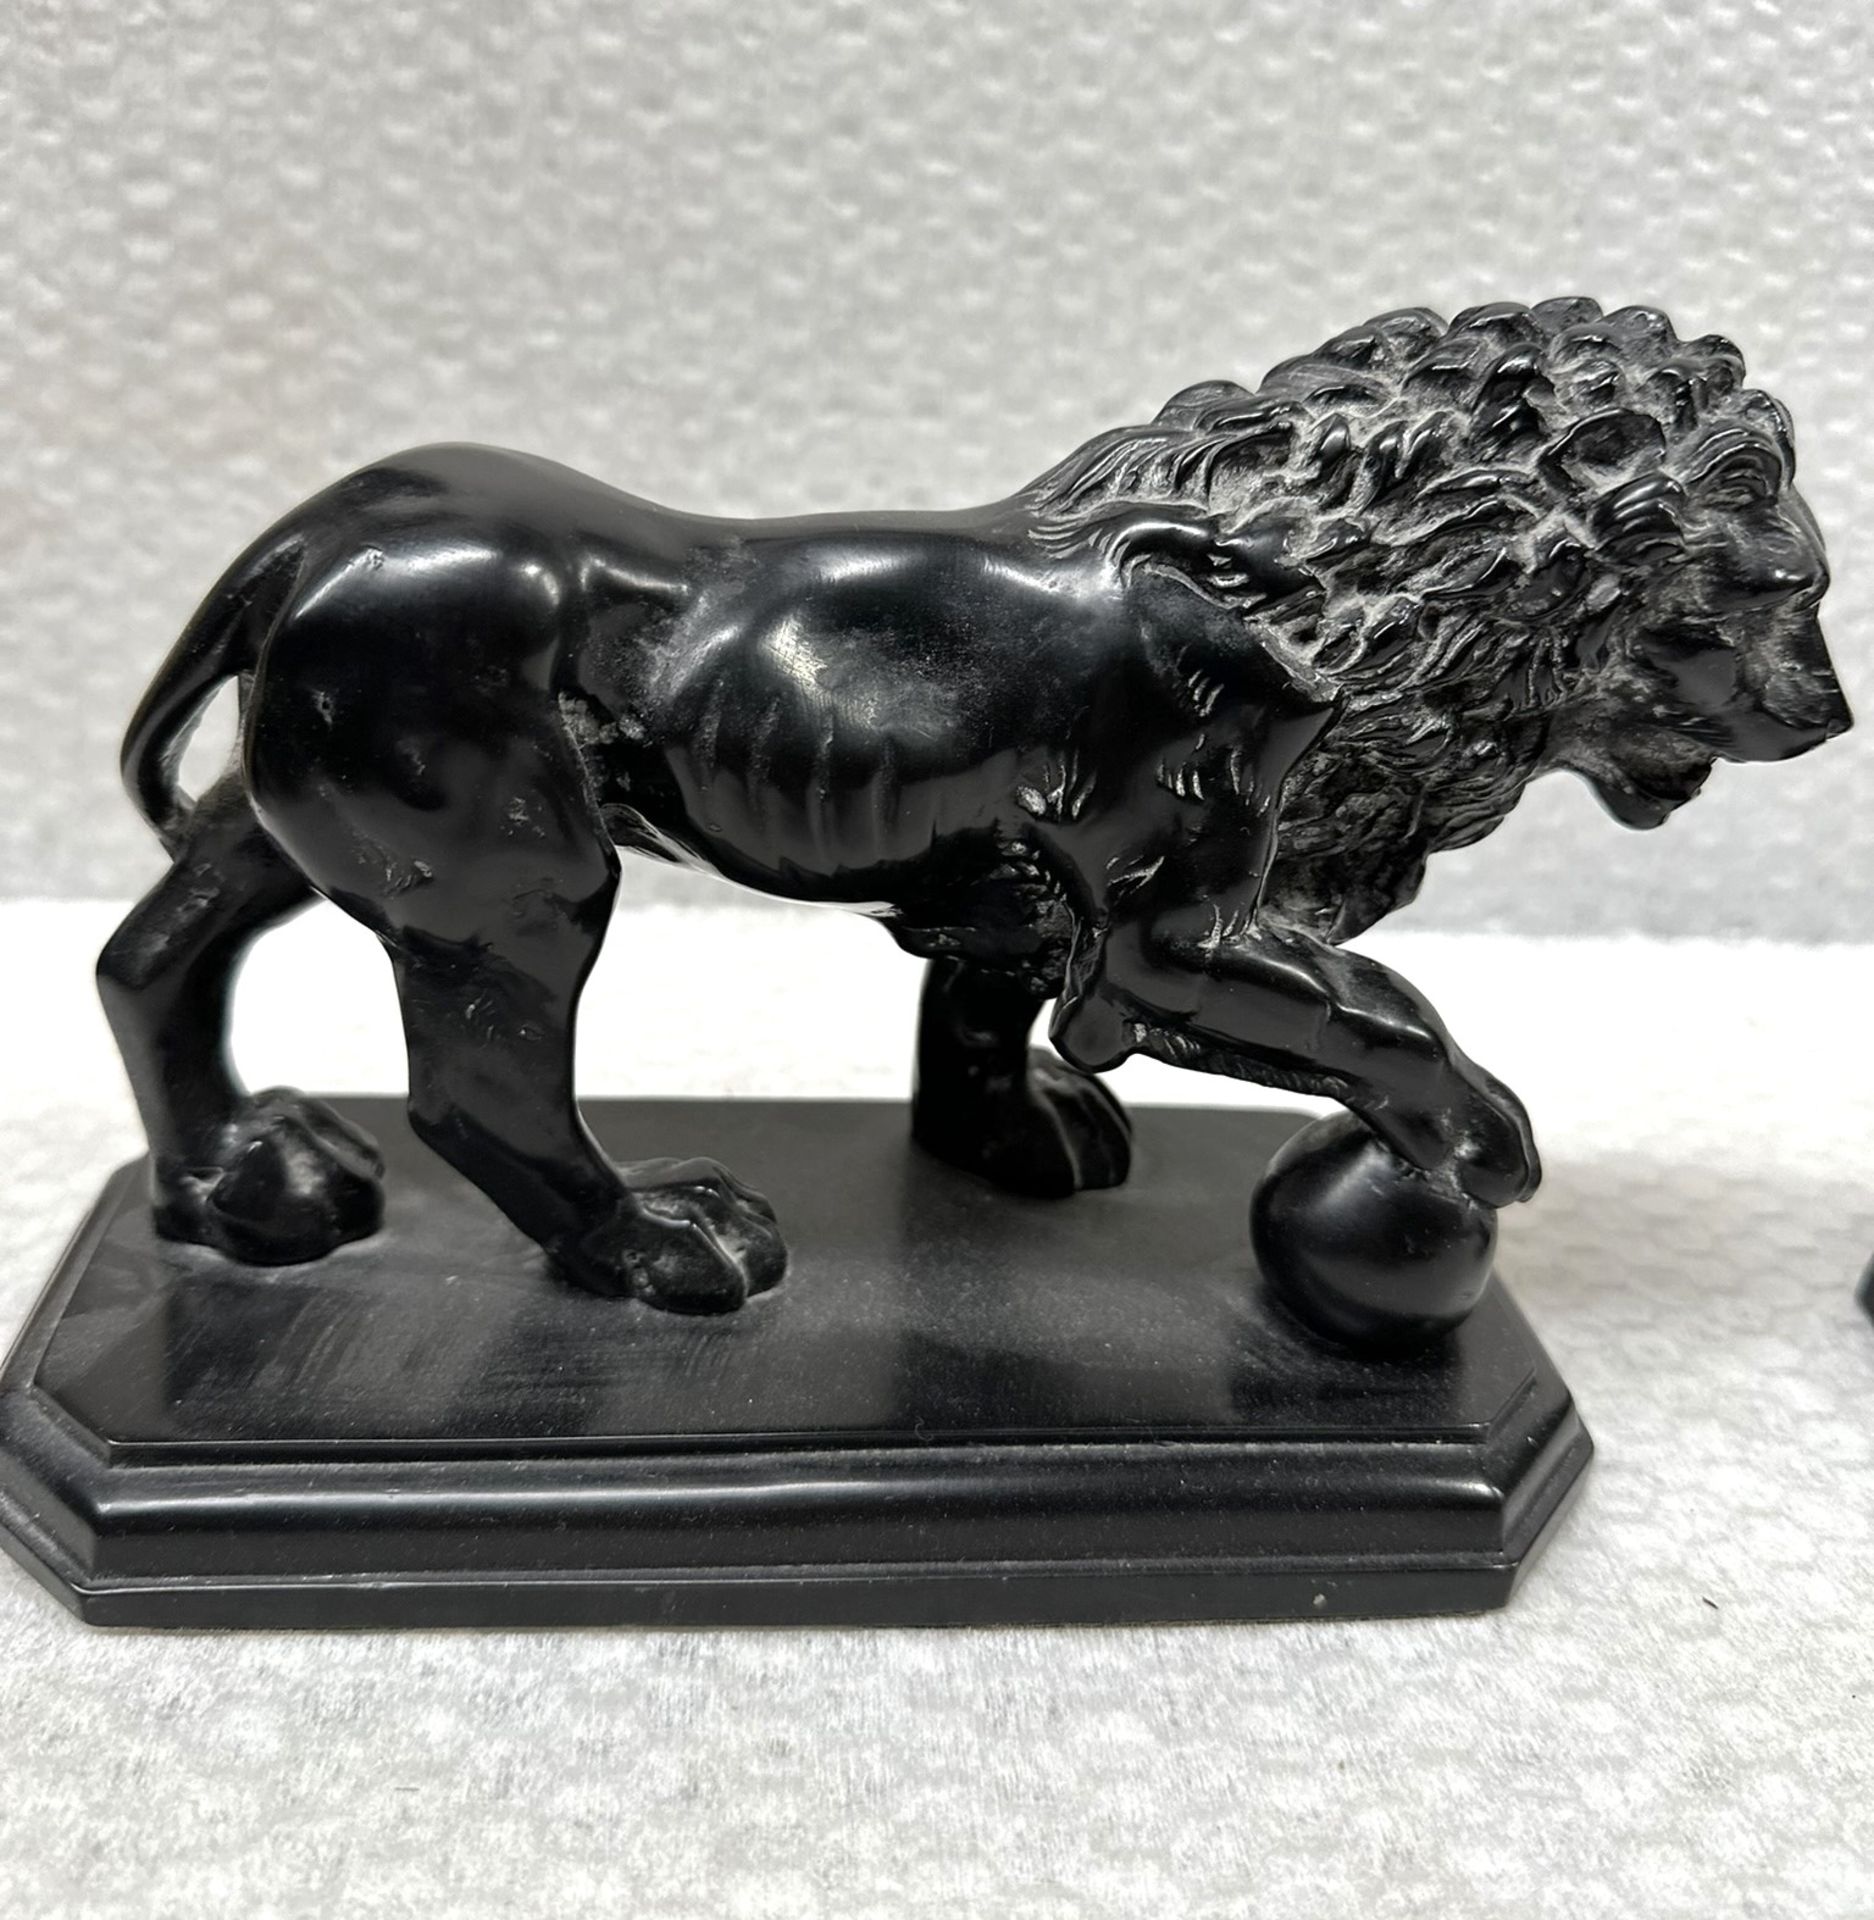 2 x Black Sleeping Lions Resin Bookends